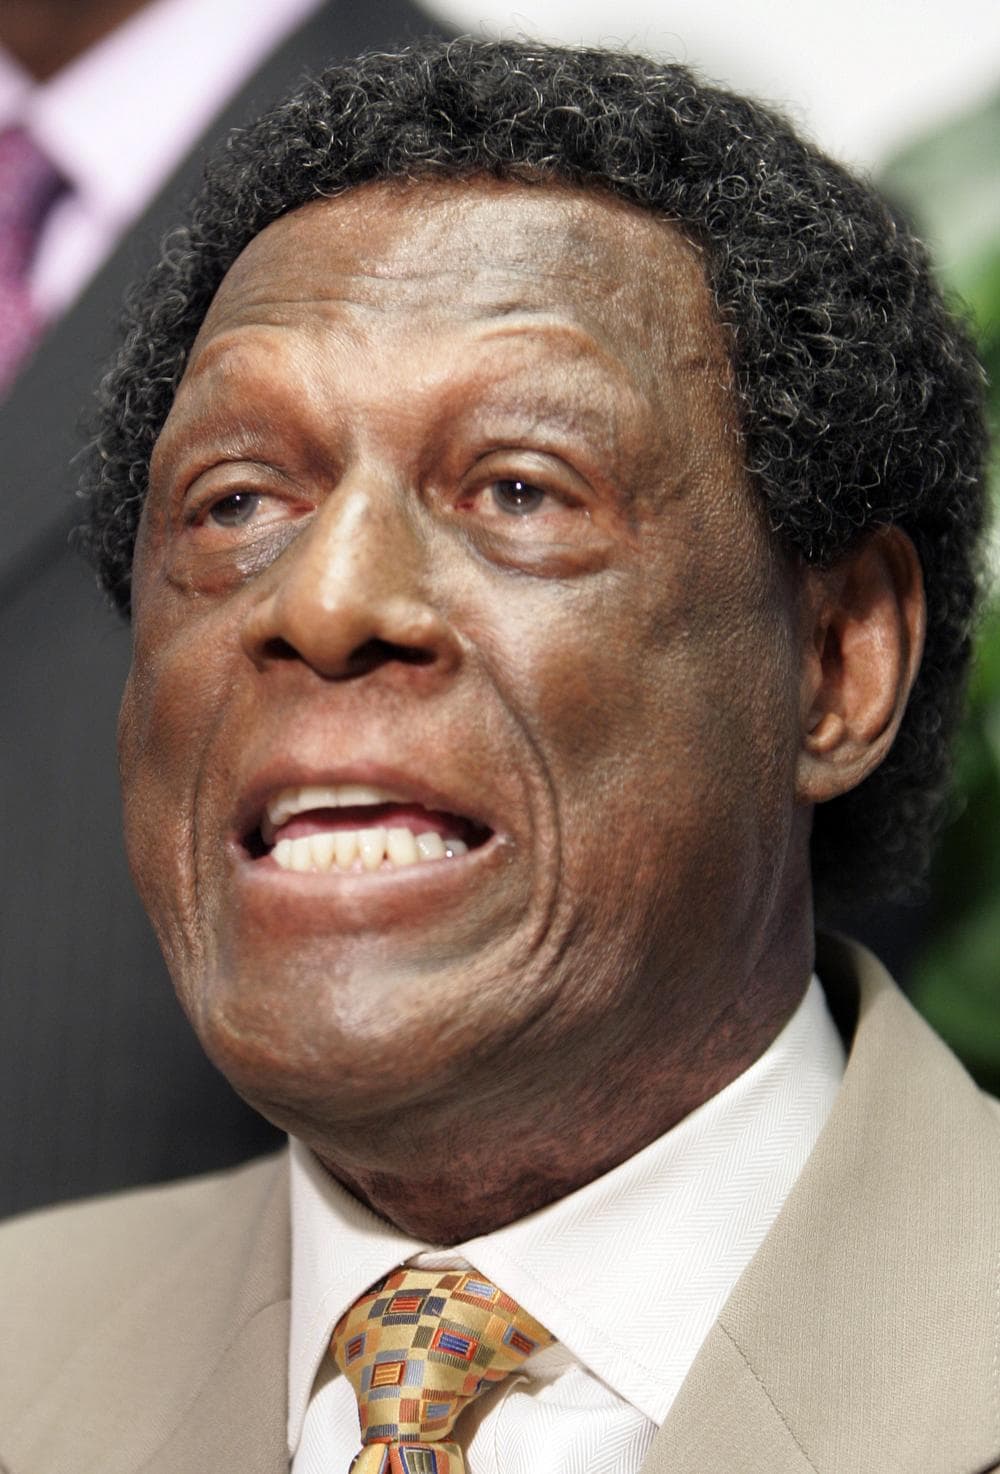 NBA Hall of Famer and former Los Angeles Clippers executive Elgin Baylor is suing the team saying he was wrongfully terminated in 2008 &quot;on account of his age and his race&quot; and that he was grossly underpaid. (AP)